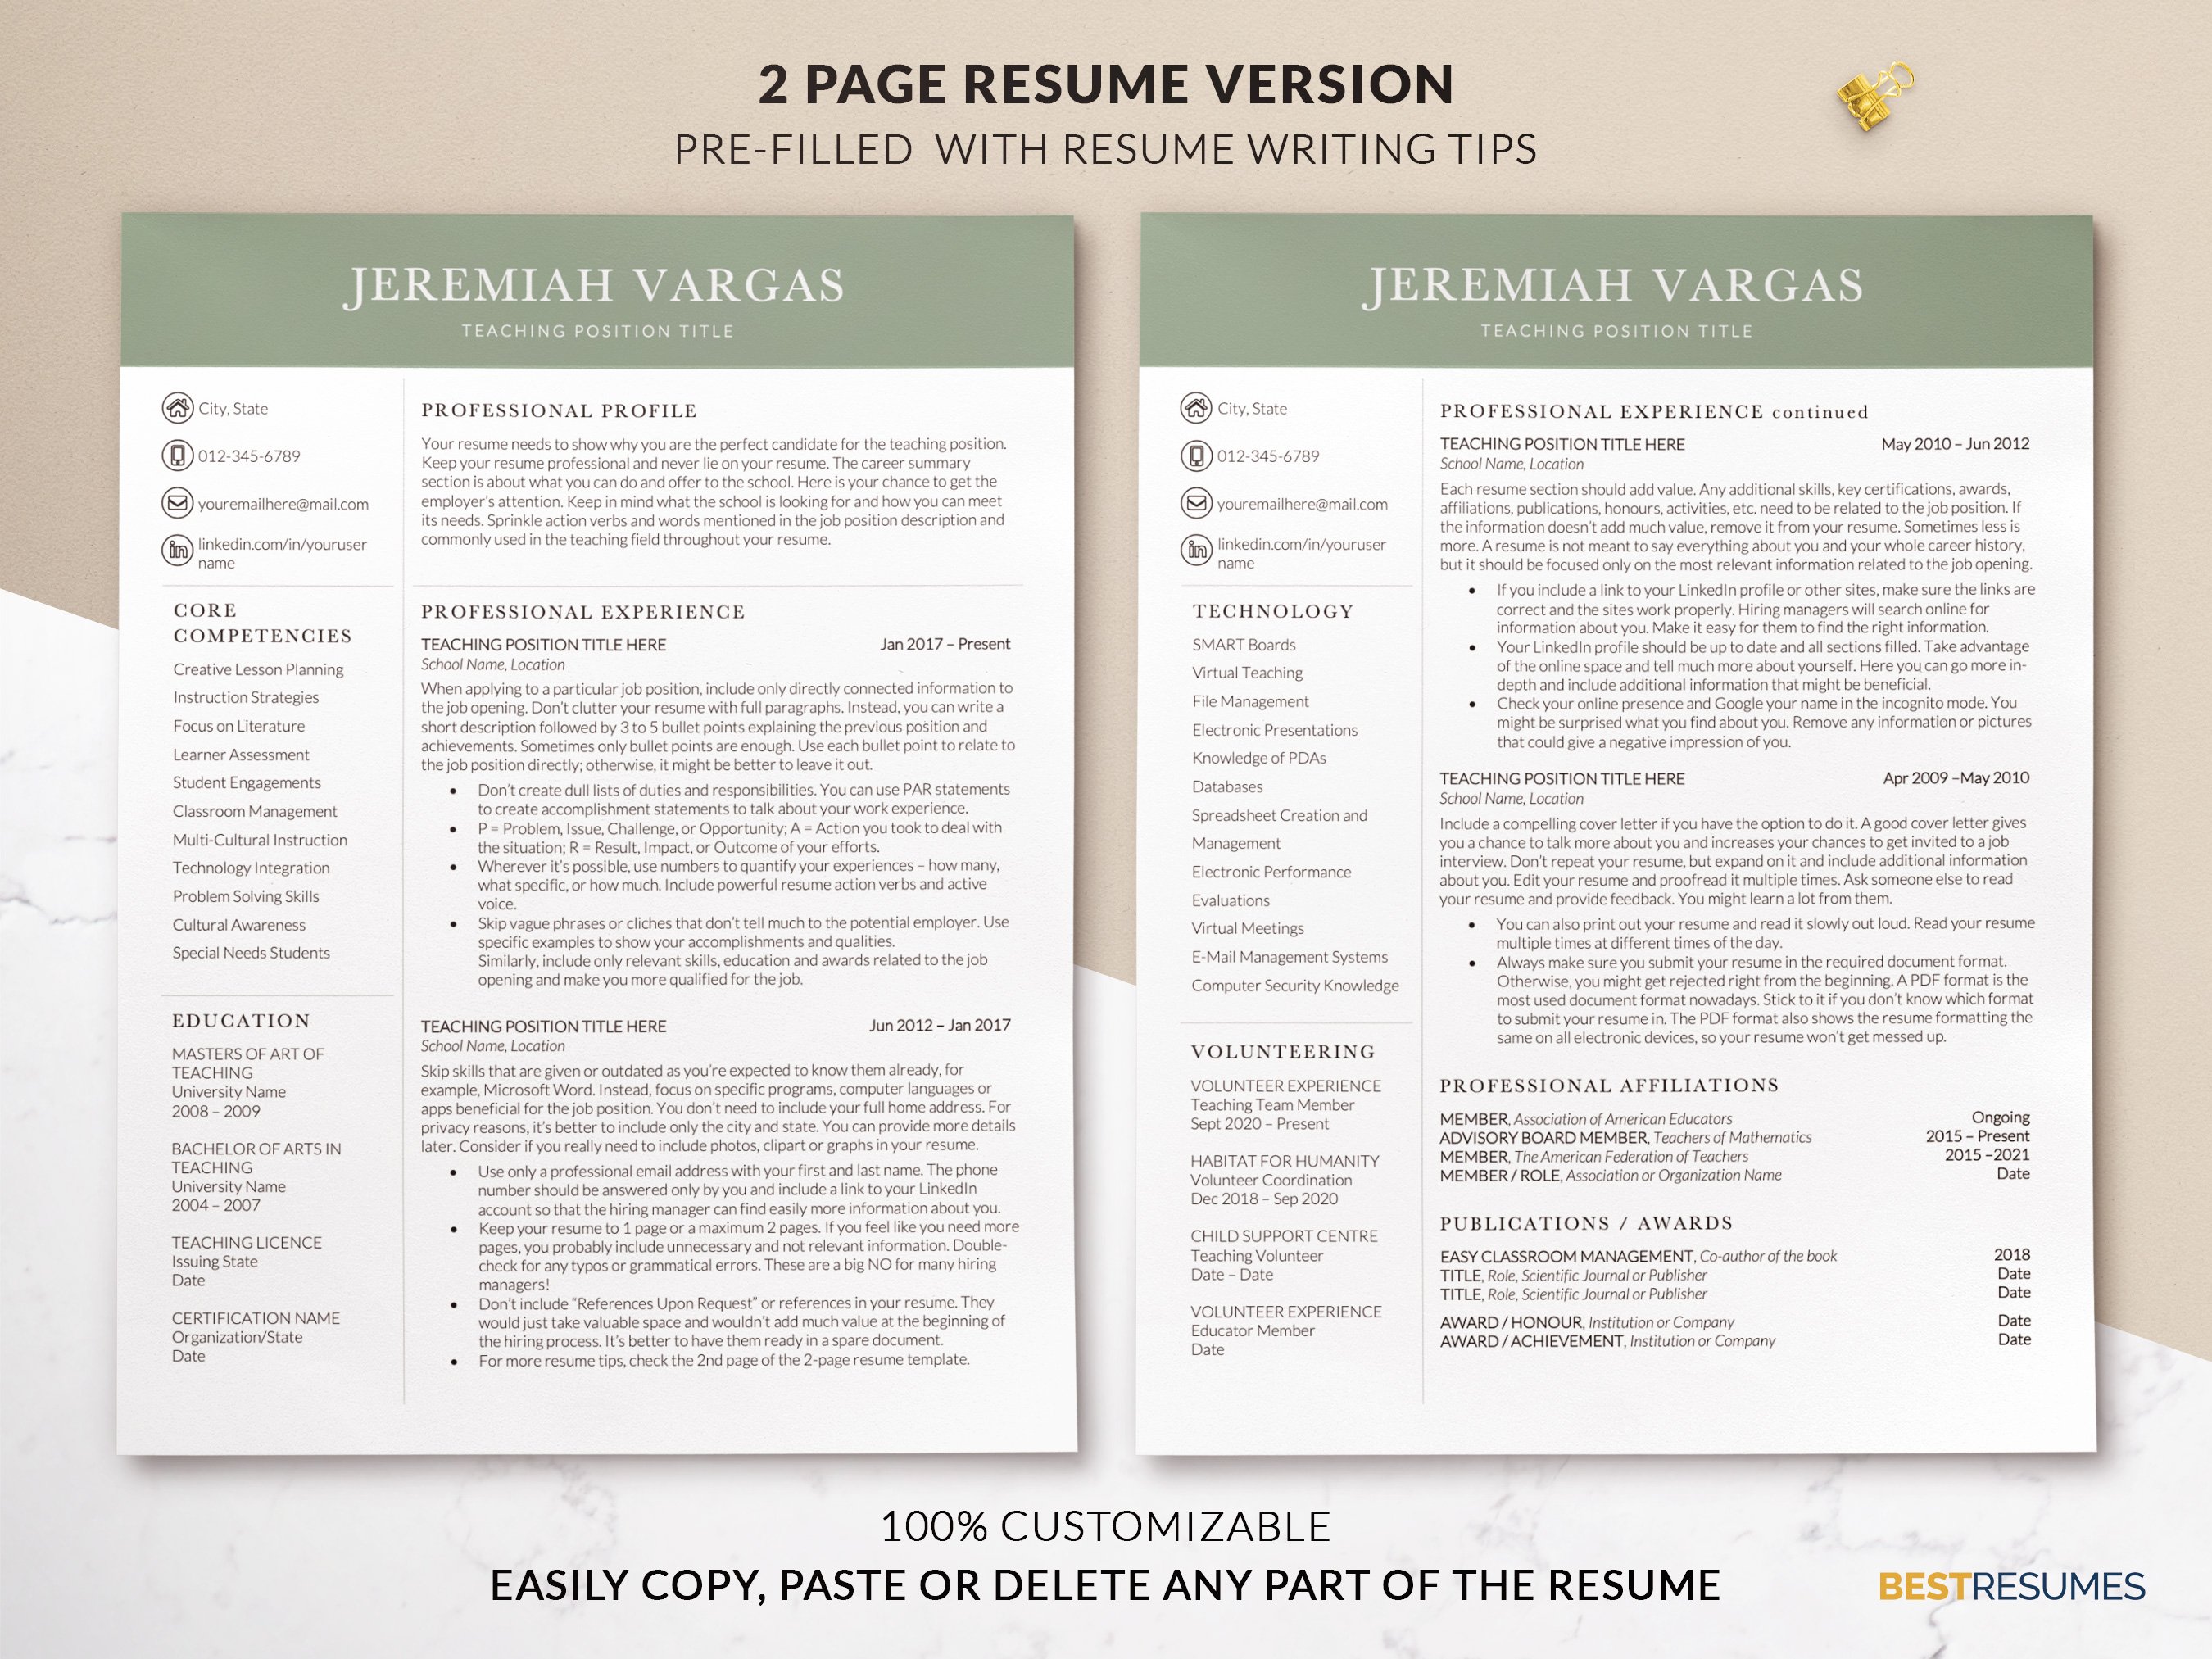 resume template for teachers two page resume template jeremiah vargas 60